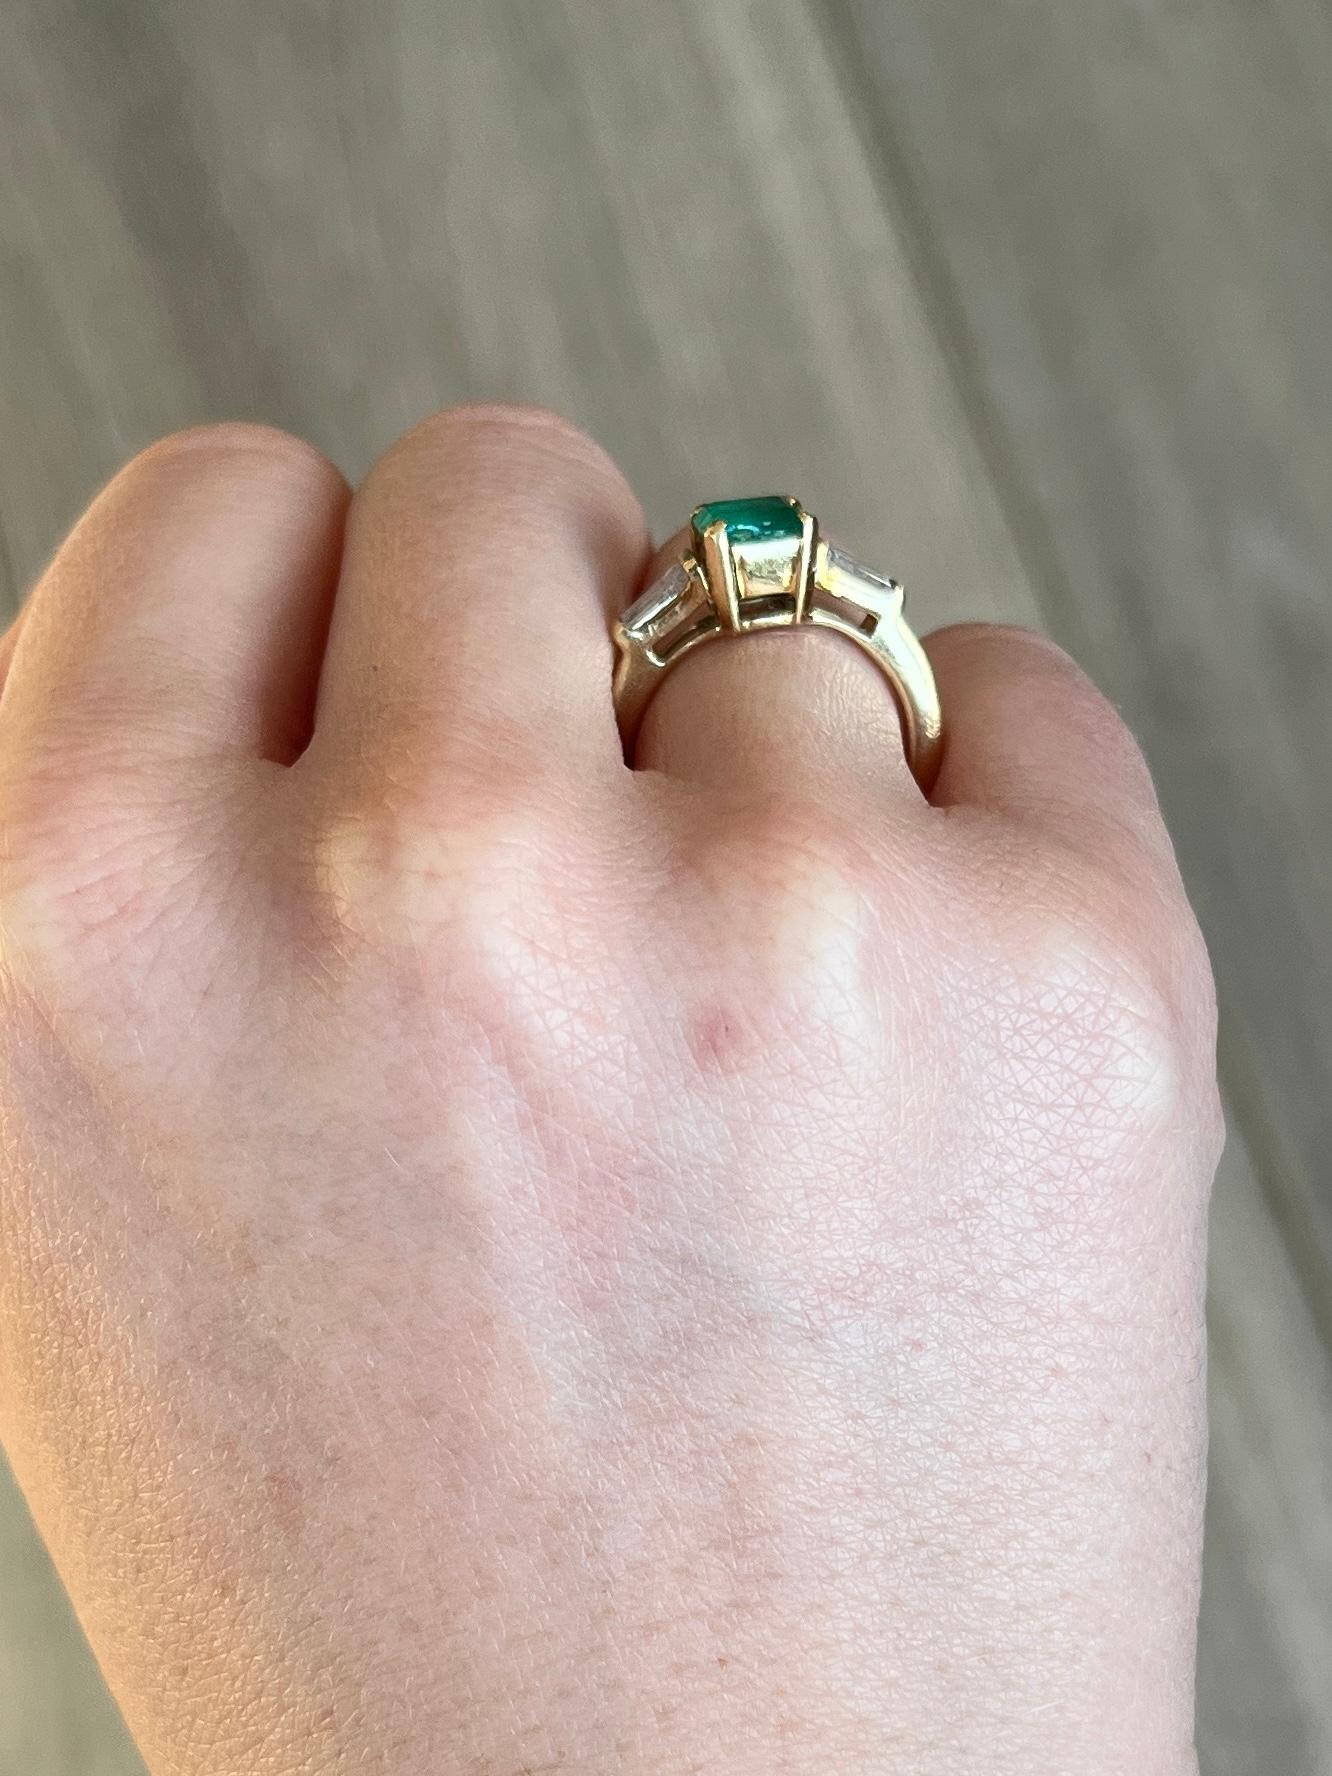 The Emerald in this ring measures 60pts and is a great colour. Either side sits a tapered baguette diamond, the diamond total is approx 20pts. The ring is modelled out of 18ct gold. 

Ring Size: K 1/2 or 5 1/2 
Height Off Finger: 7mm

Weight: 5g